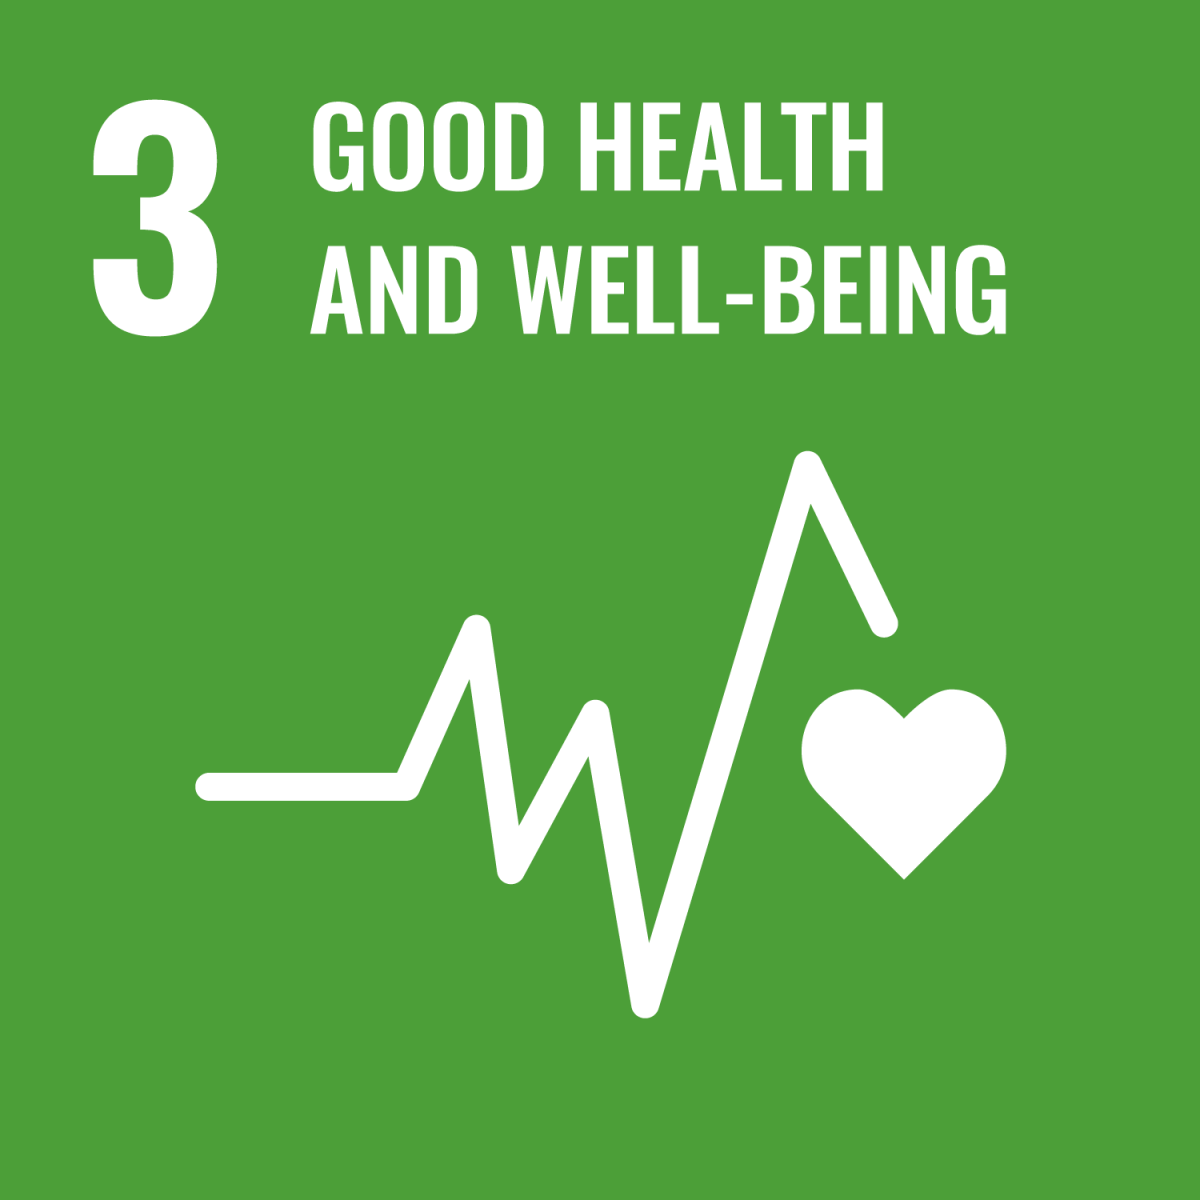 Shows UN SDG 2 - Good Health and Wellbeing